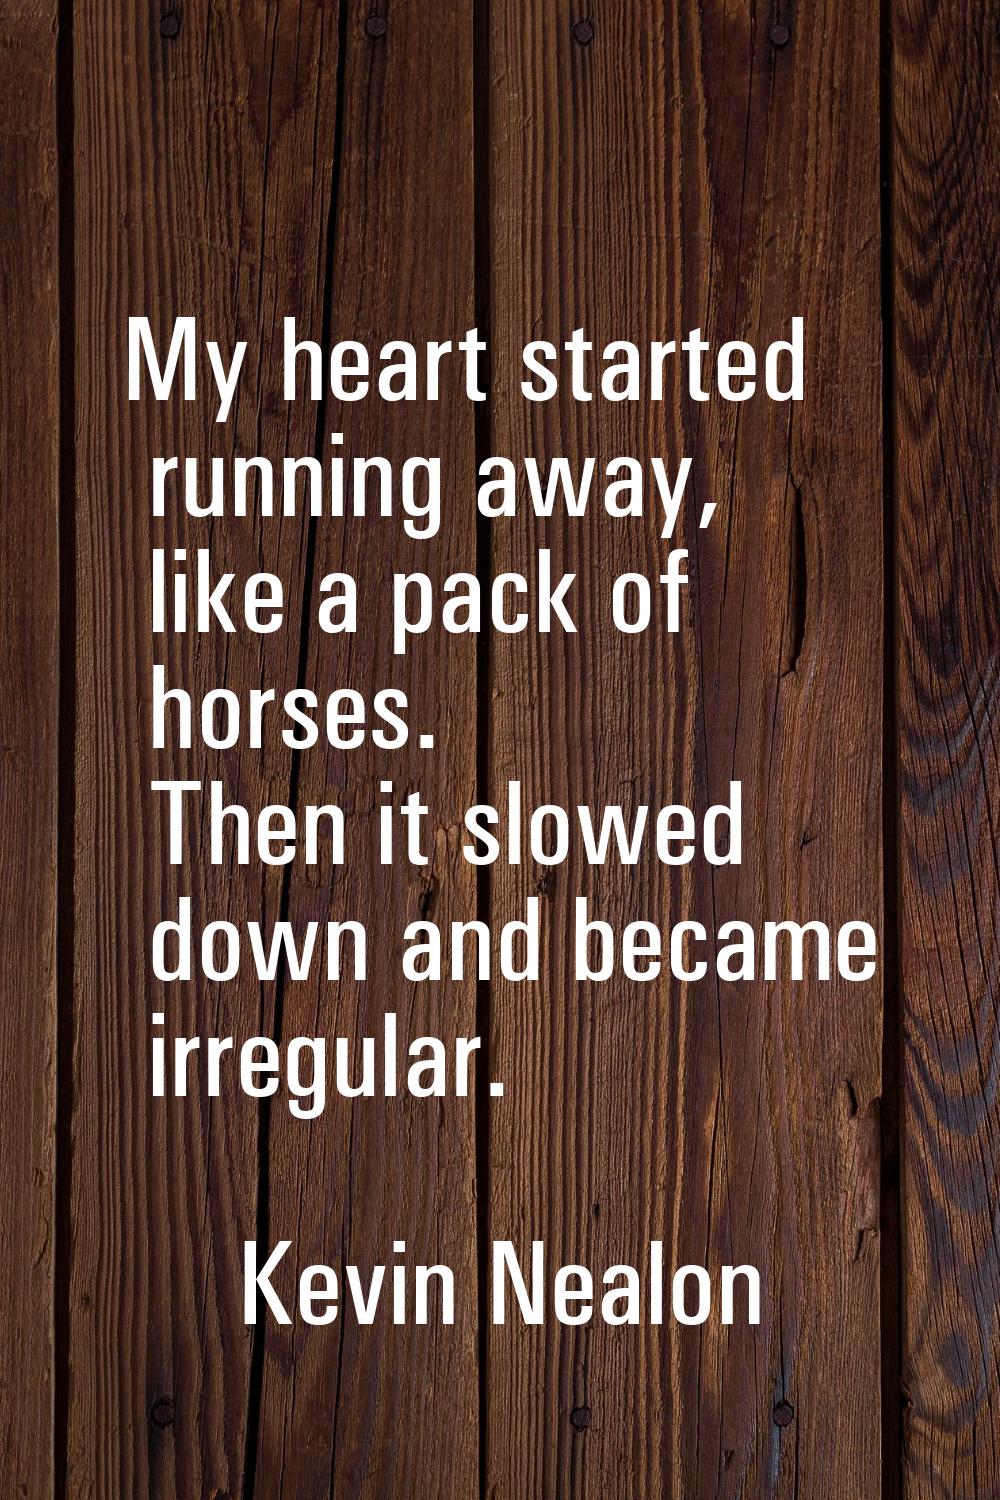 My heart started running away, like a pack of horses. Then it slowed down and became irregular.